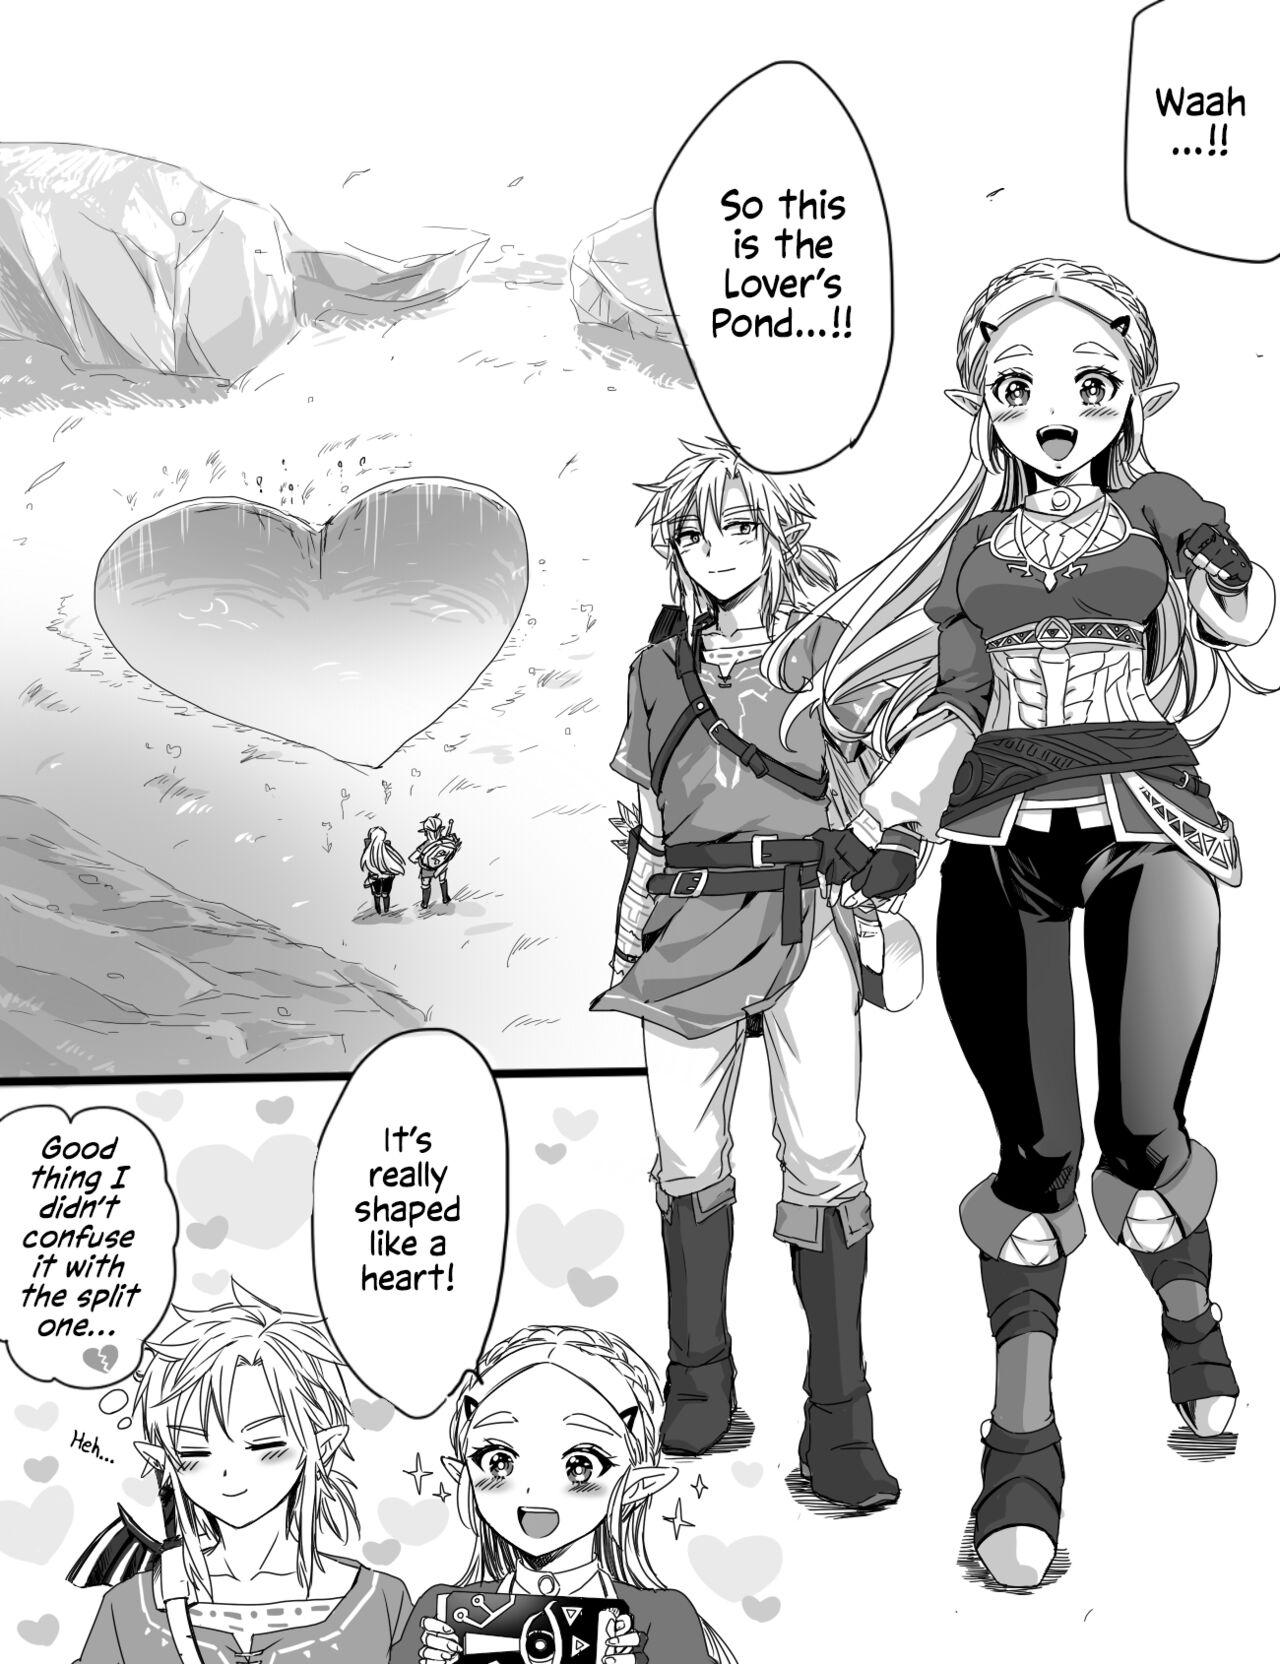 Young Love Pond Power | The Power of the Lover's Pond - The legend of zelda Stretching - Page 2